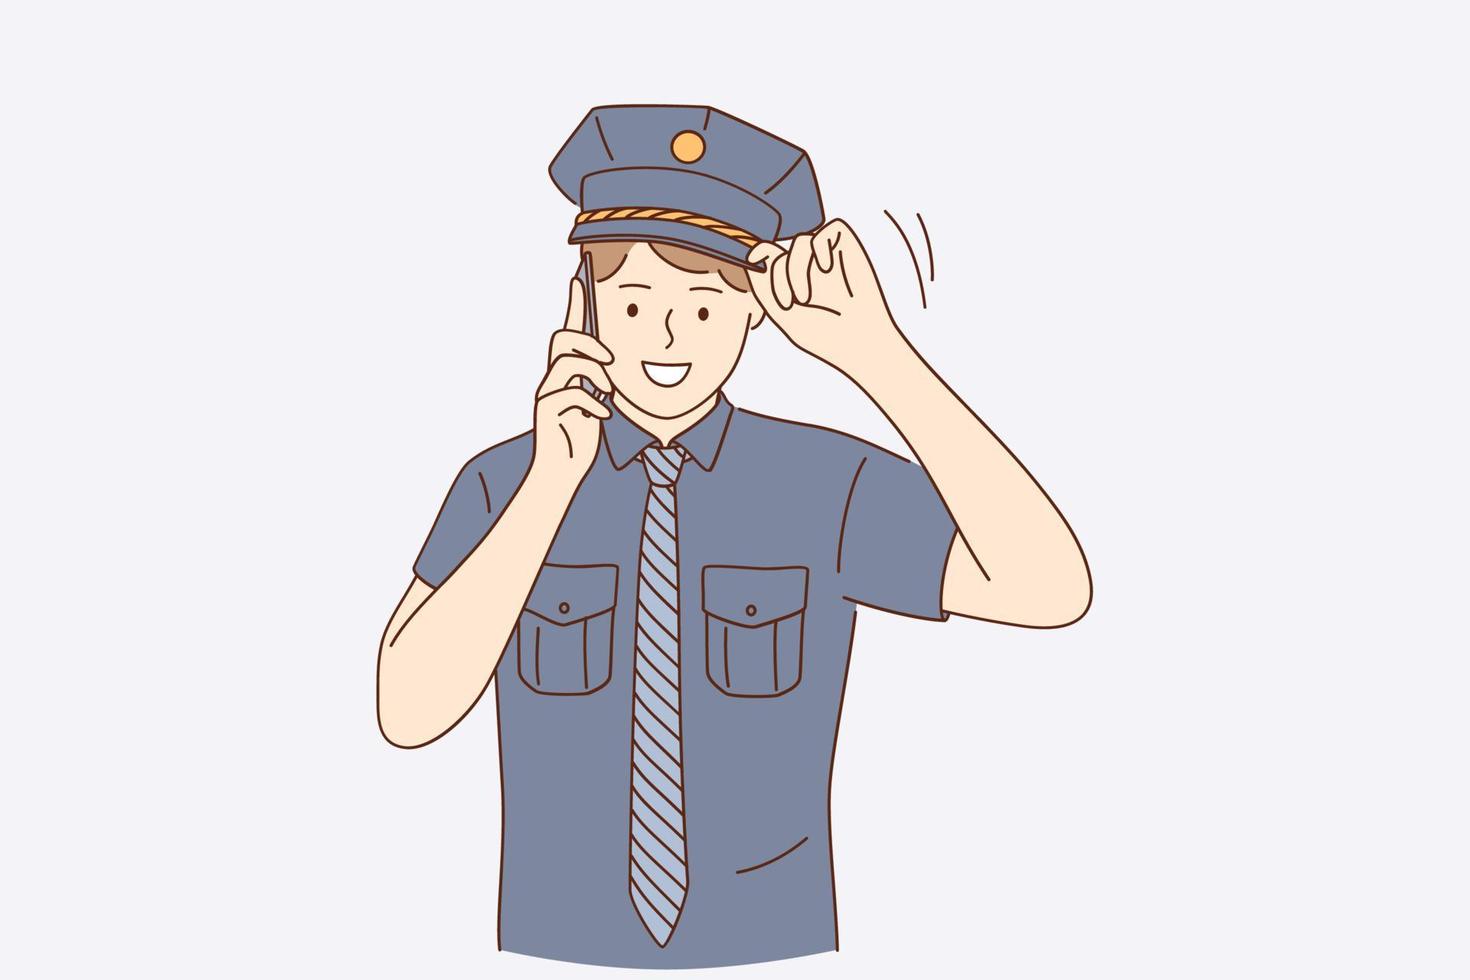 Policeman during work concept. Young handsome positive policeman wearing police uniform talking on smartphone outdoors vector illustration